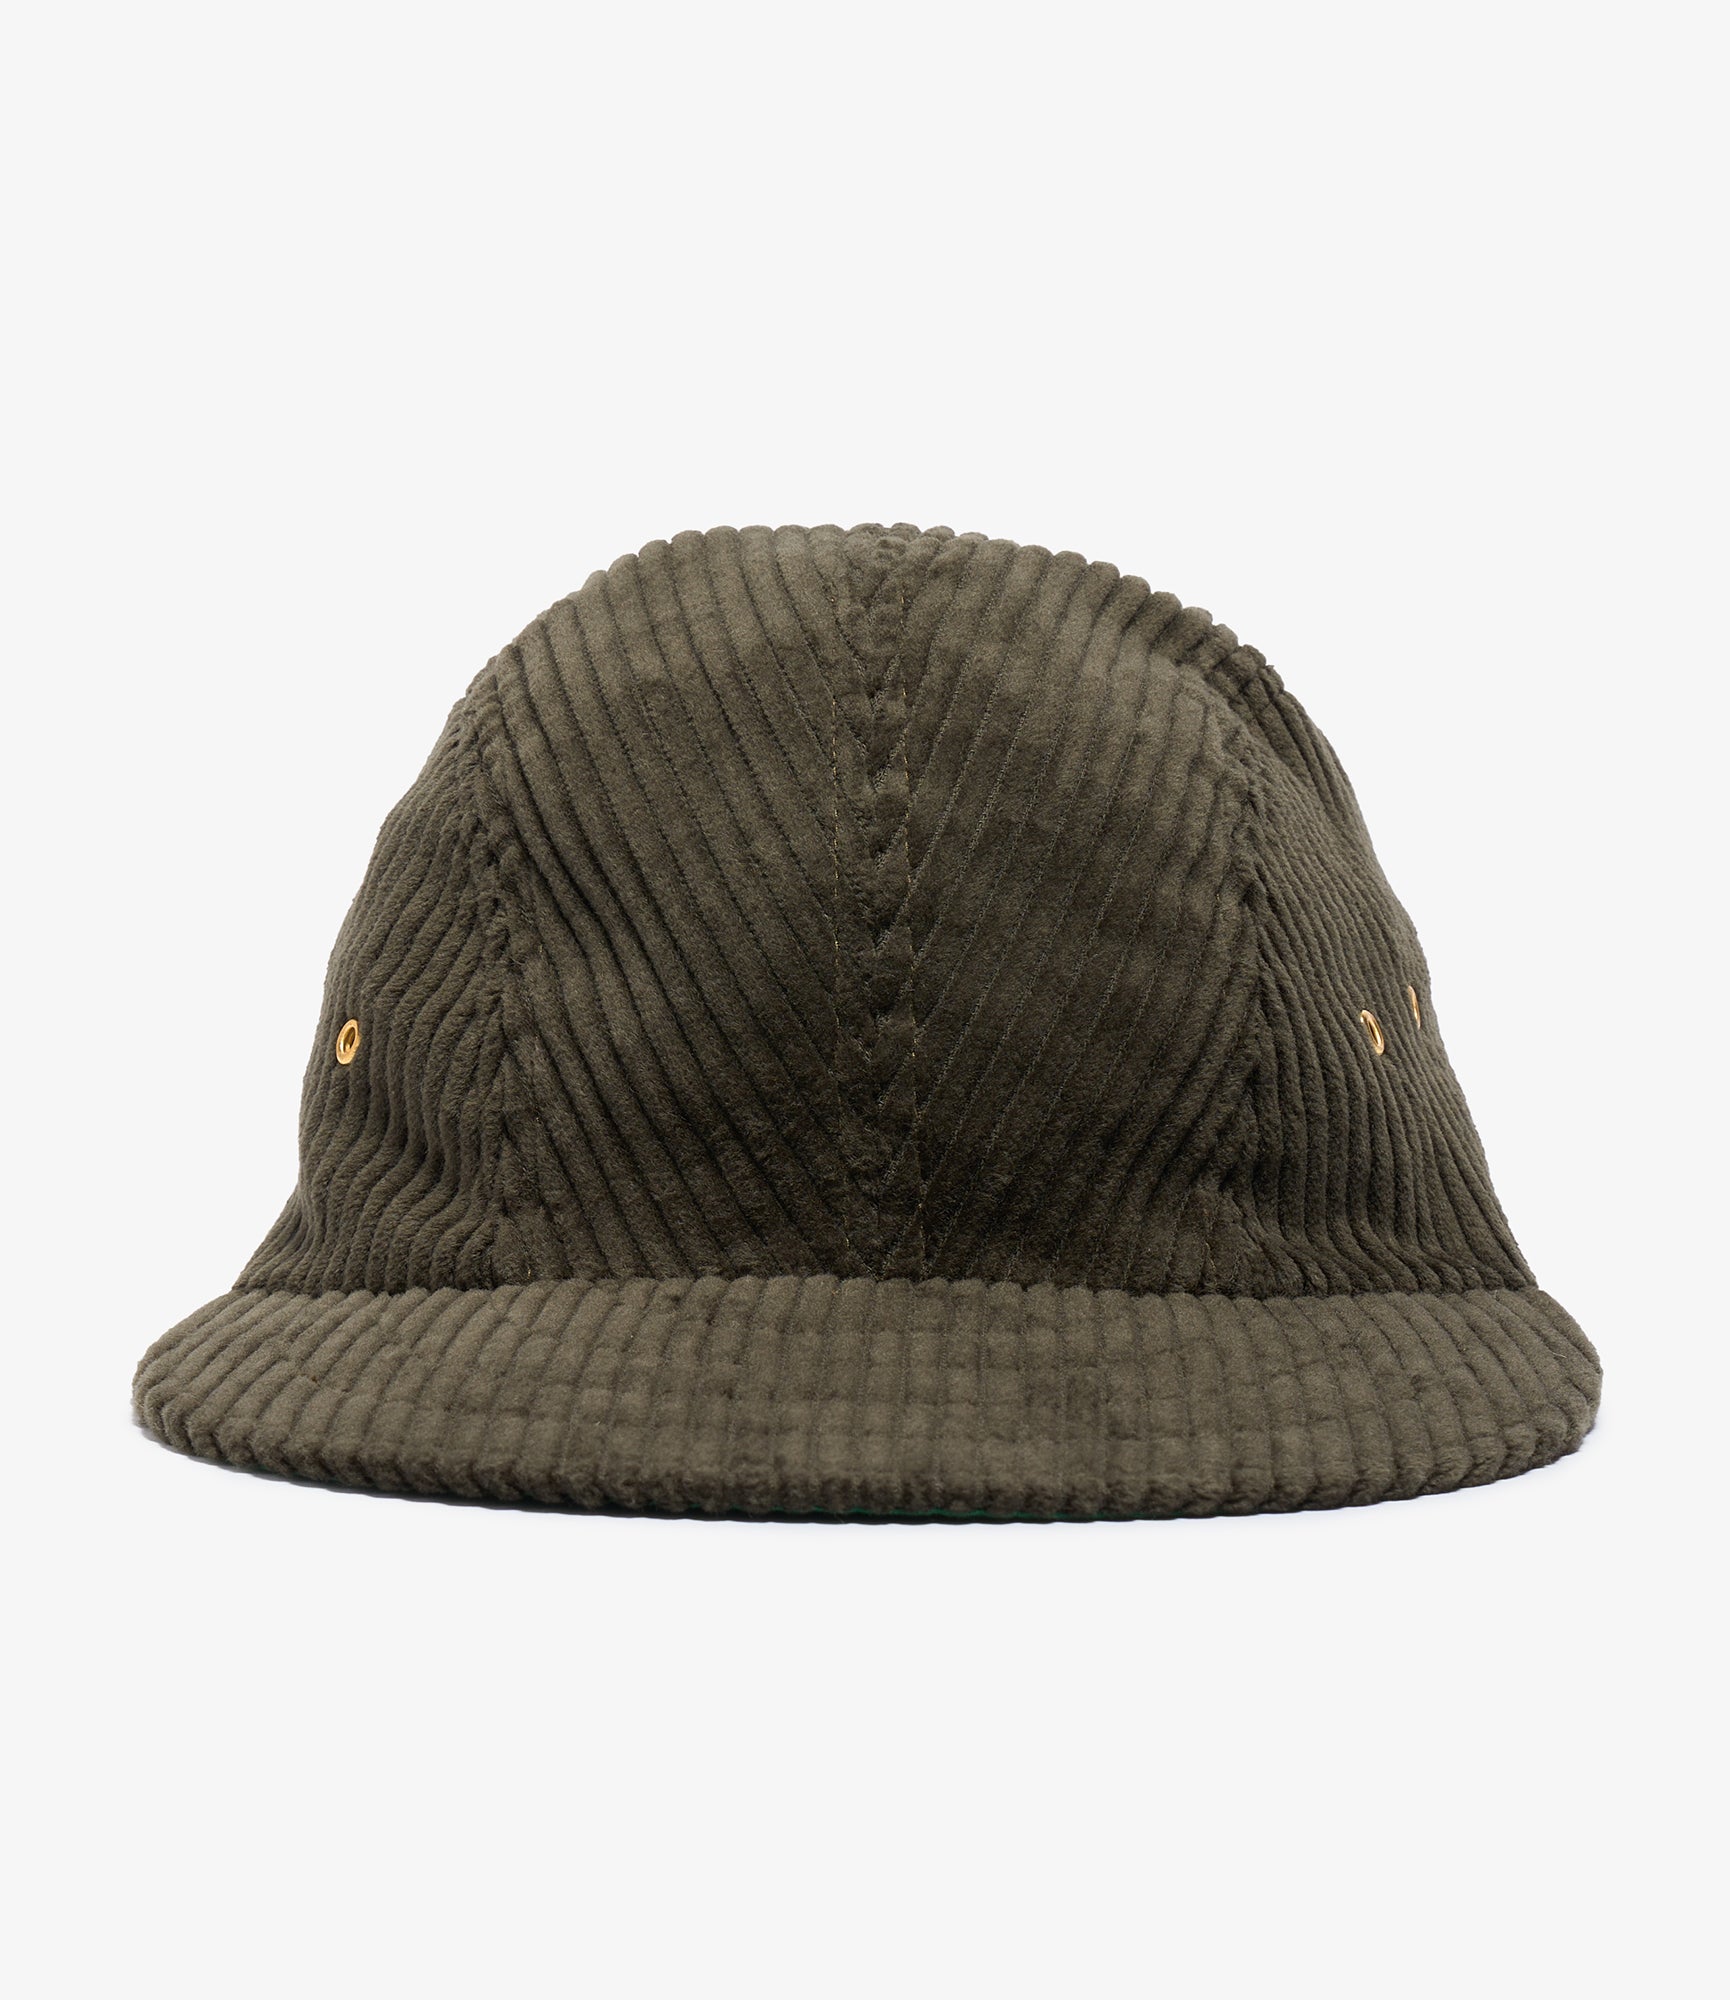 Manager in Training - 4 panel hat - Olive / Corduroy